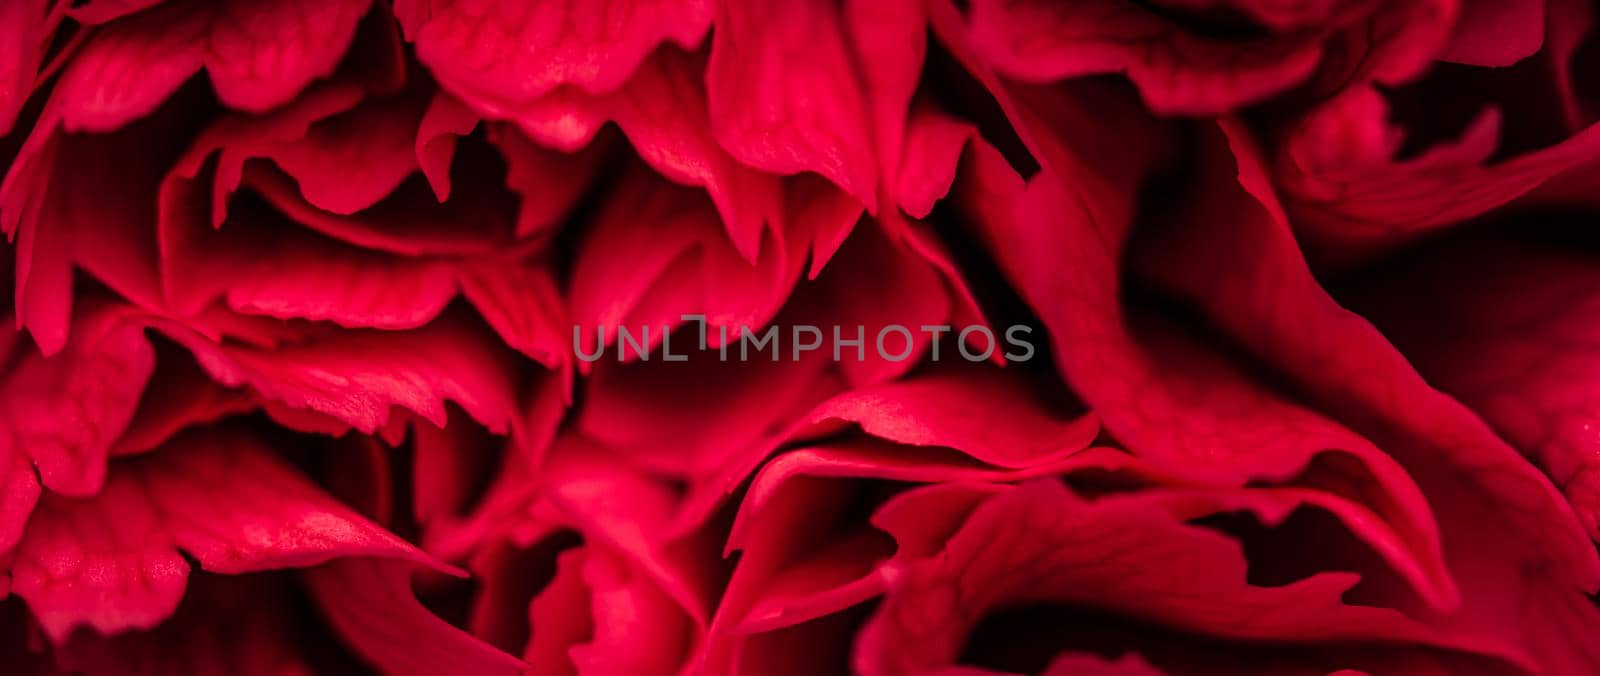 Abstract floral background, red petals of carnation flowers. Close-up flowers background for festive brand design. 